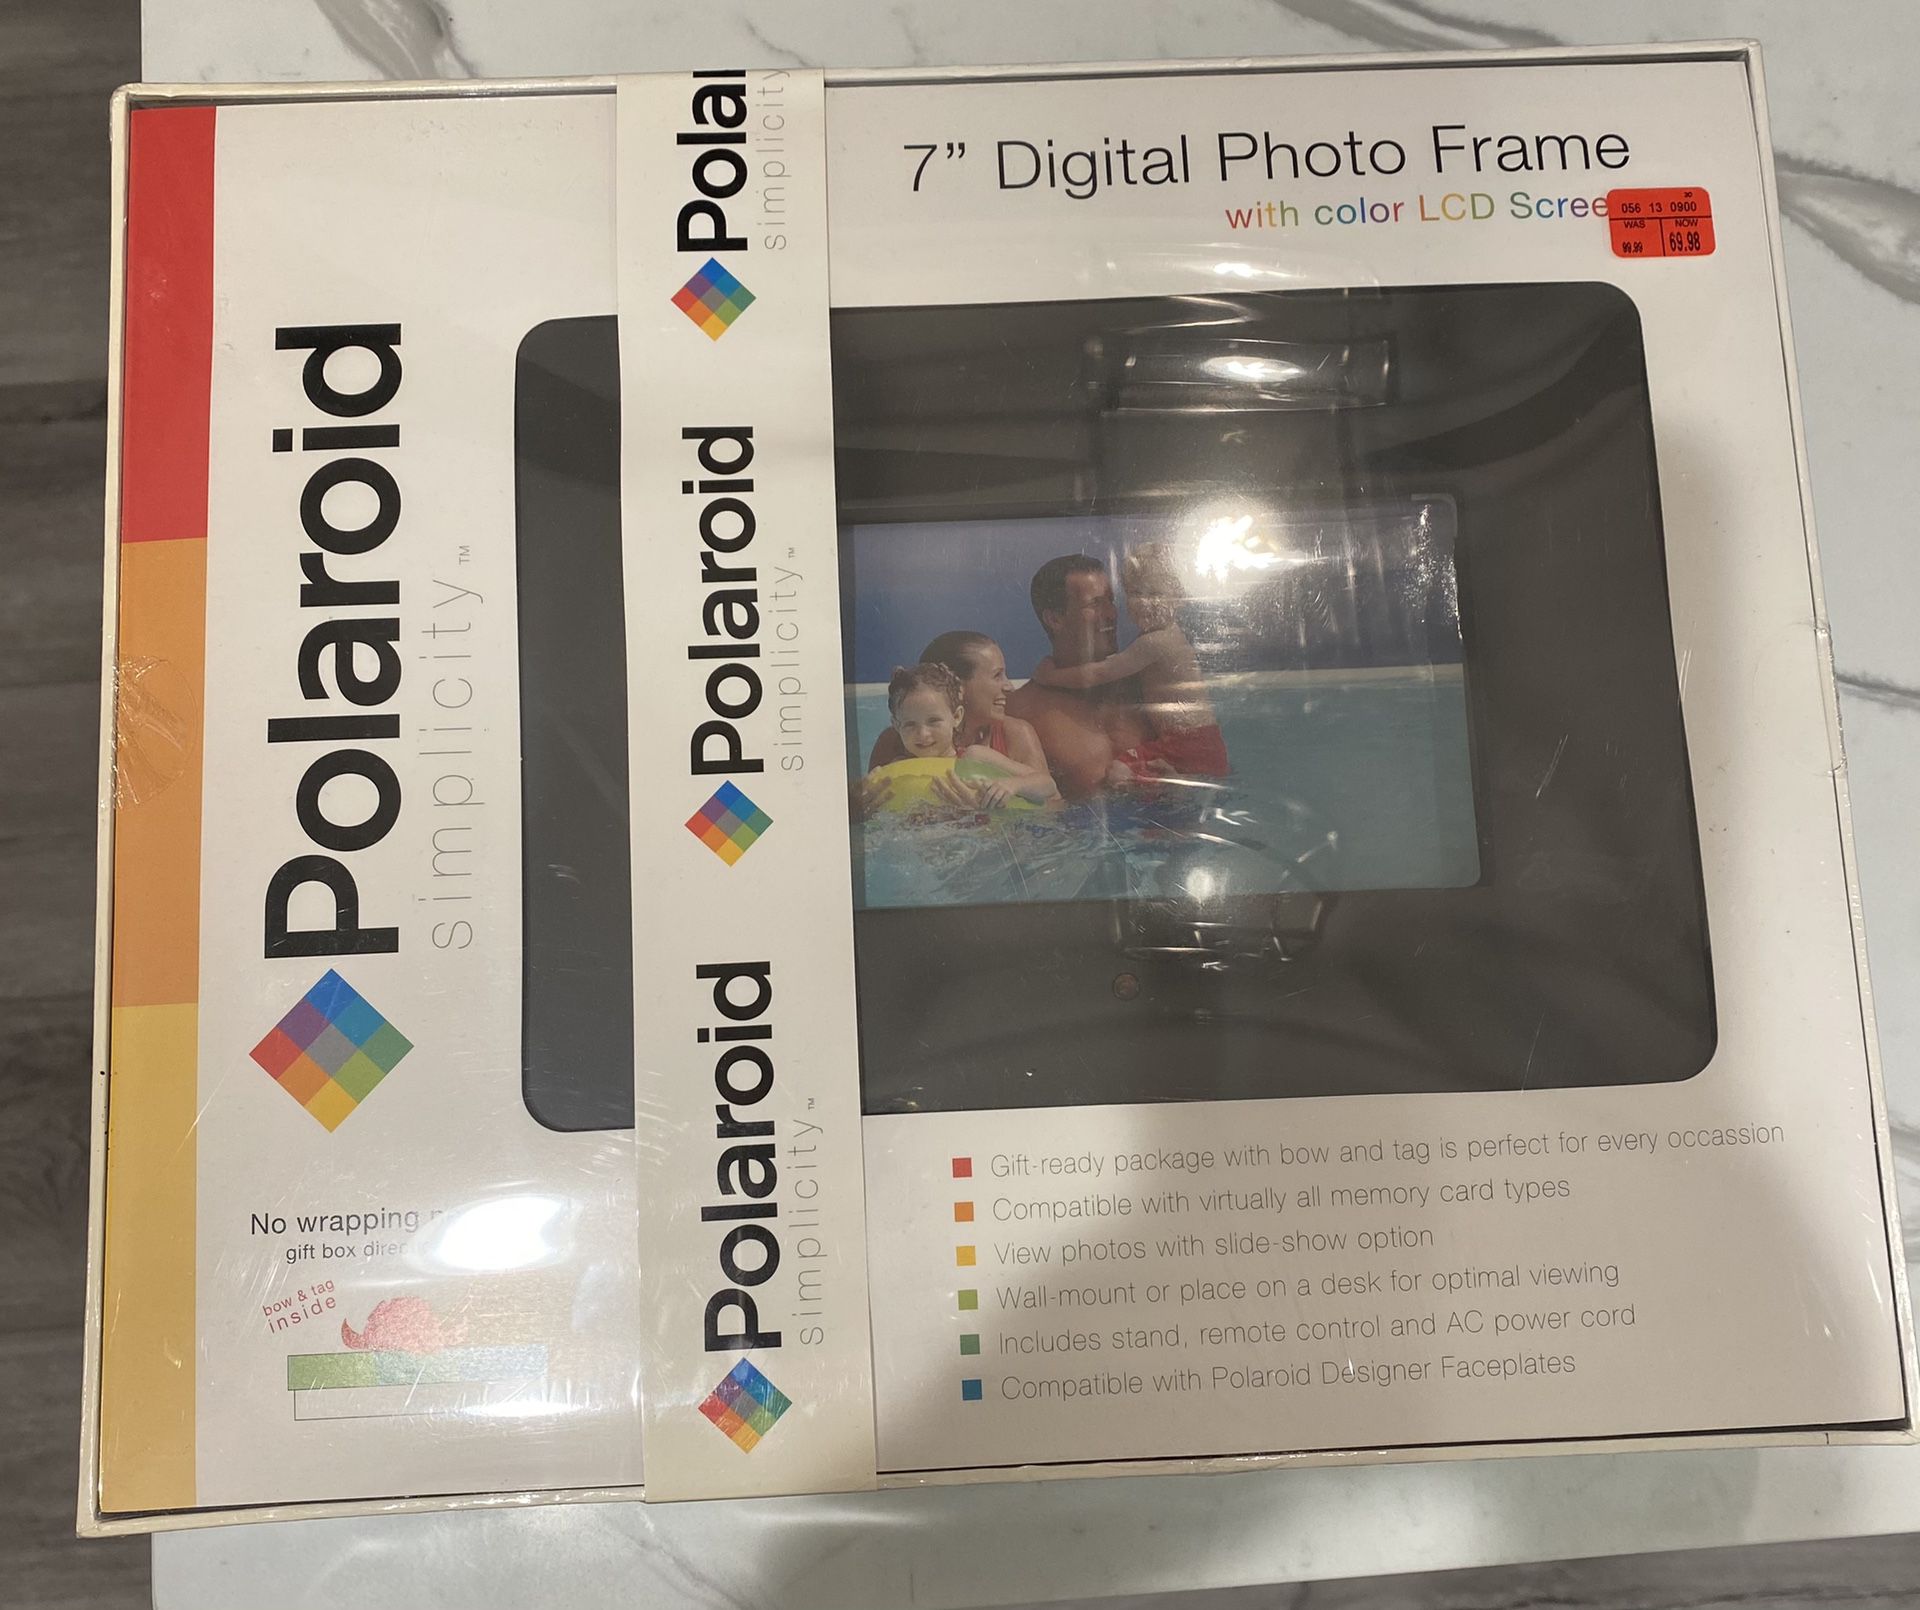 Polaroid 7” Digital Photo Frame with color LCD screen - $30 OBO